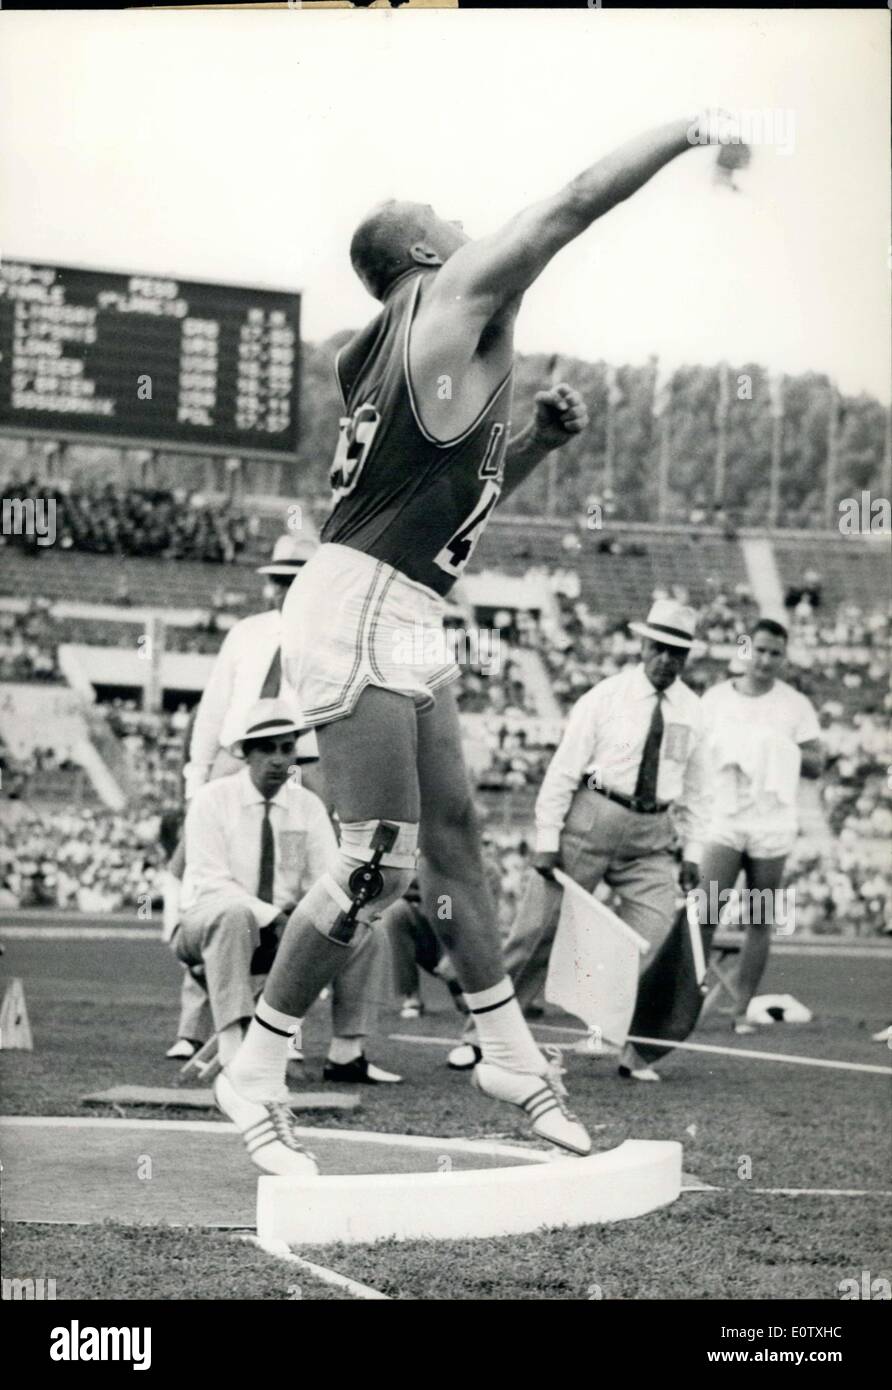 Sep. 01, 1960 - Bill Nieder sets a new Olympic shot put record.